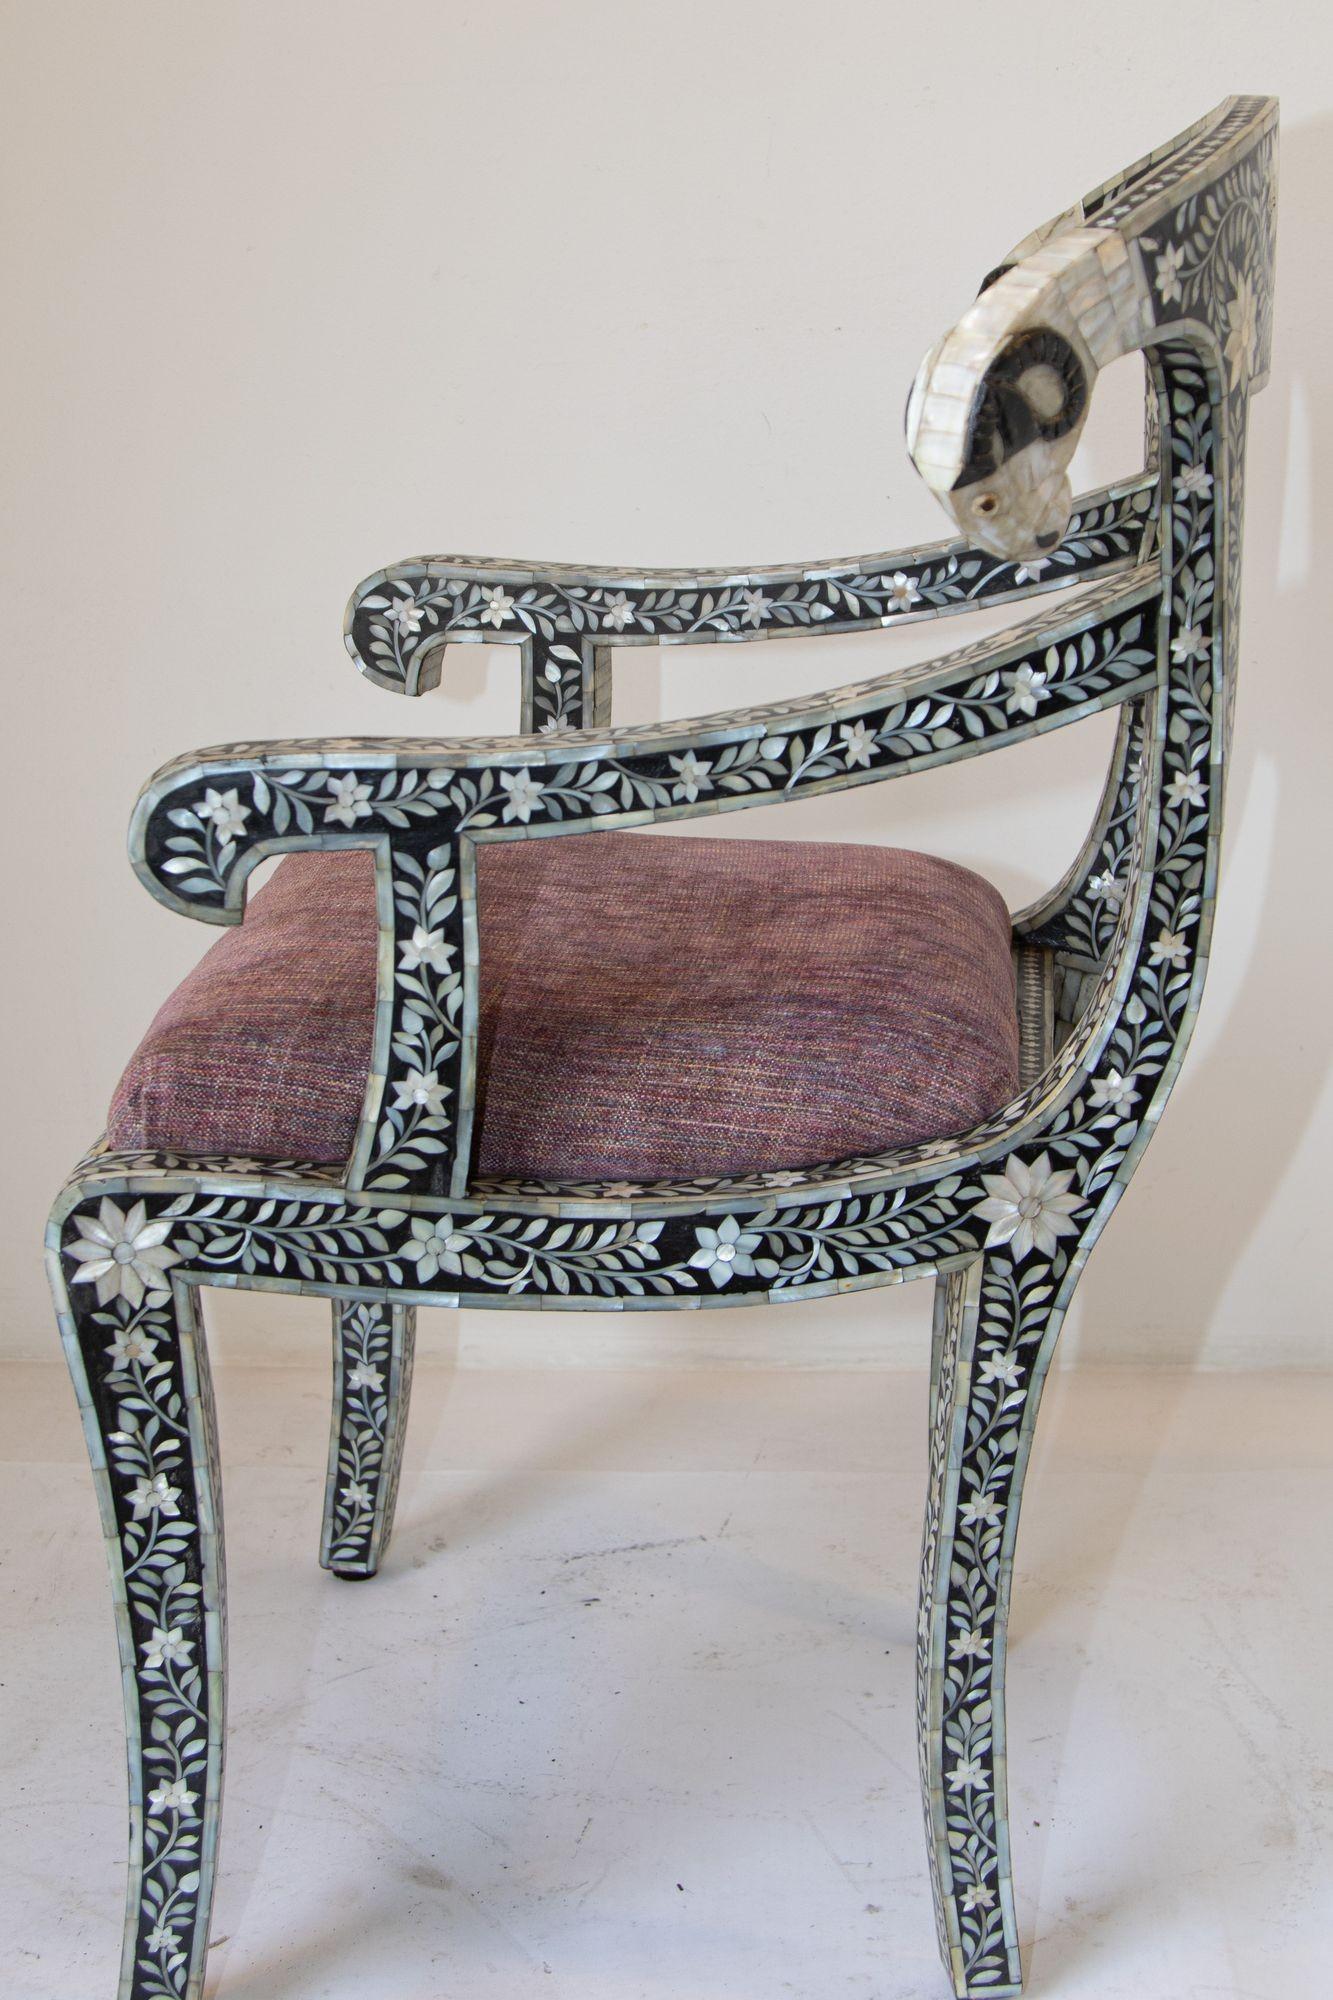 Anglo-Indian Mughal Mother of Pearl Inlaid Klismos Armchair with Ram Head 1 of 2 For Sale 9